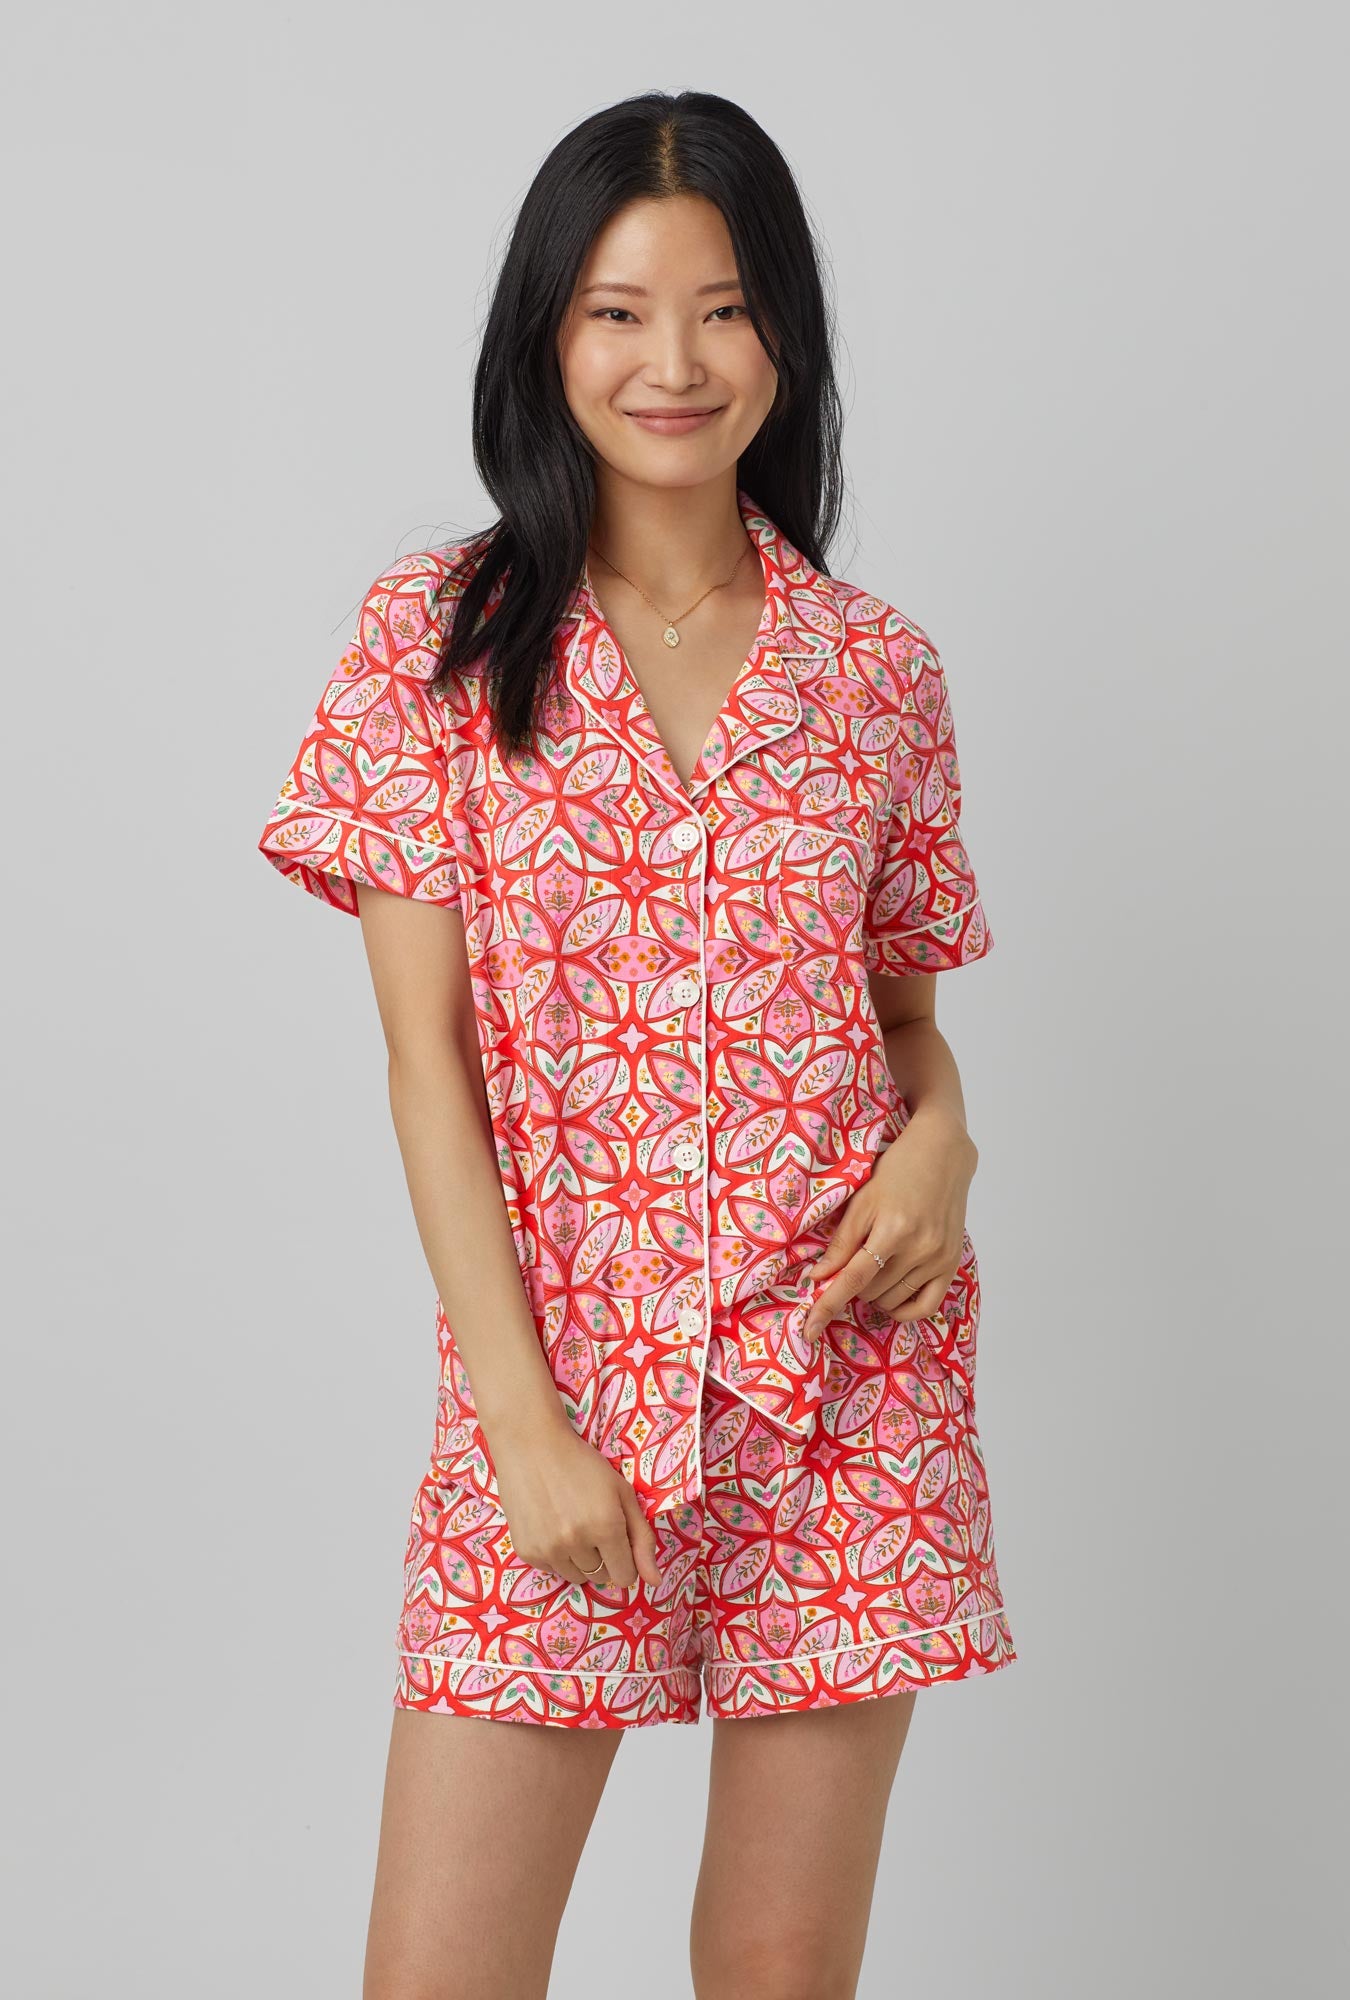 A lady wearing red Short Sleeve Classic Short Set Stretch Jersey PJ Set with Prairie Dawn print